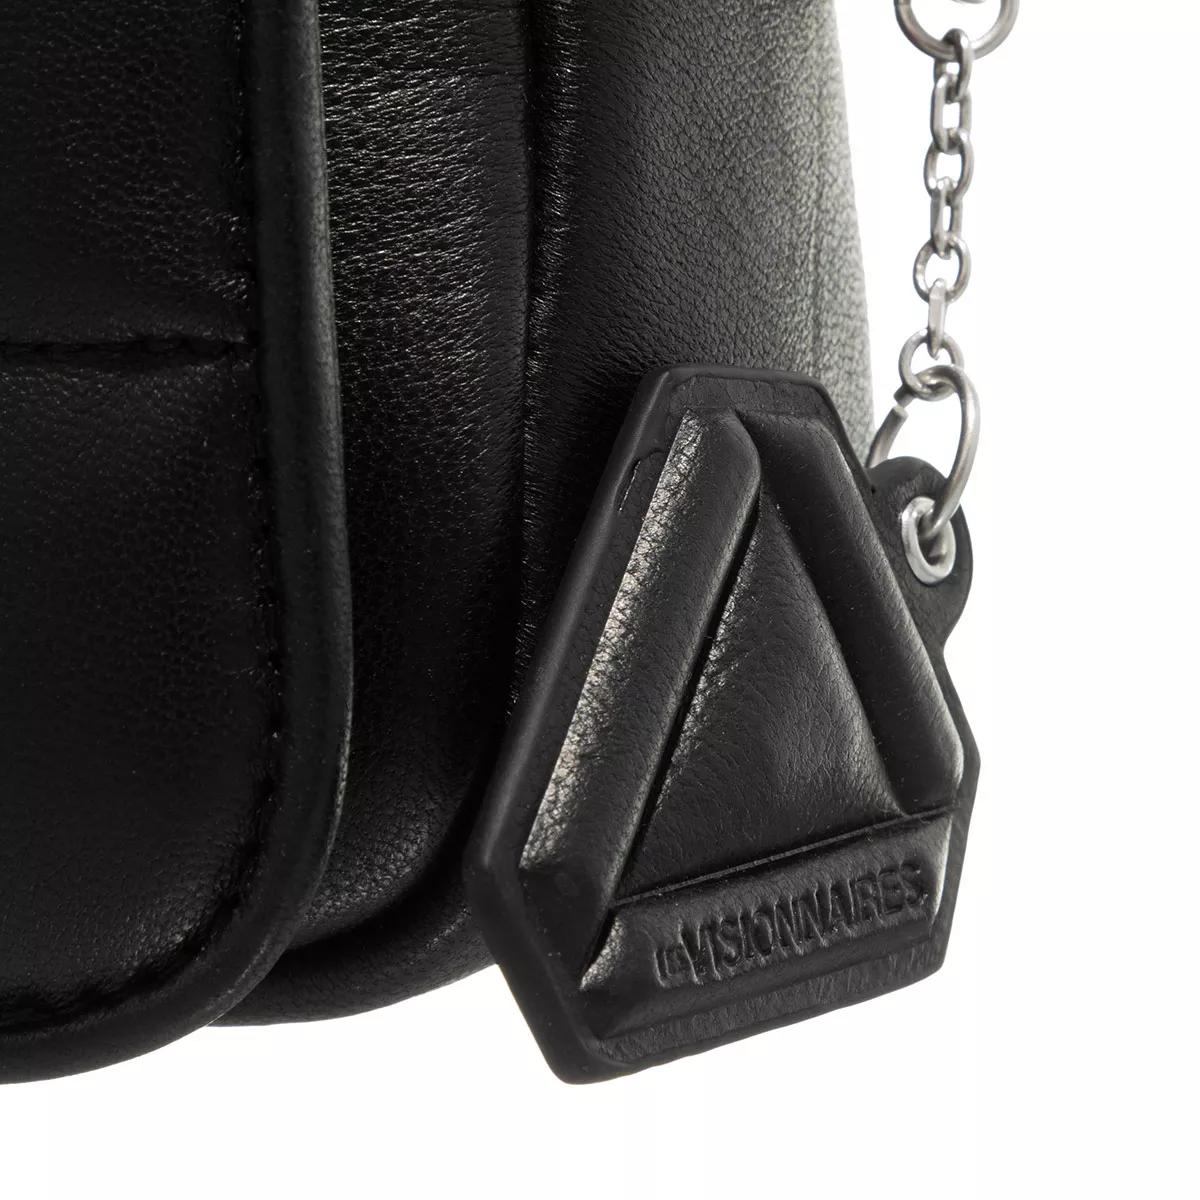 LES VISIONNAIRES Crossbody bags Emily Puffy Leather in zwart